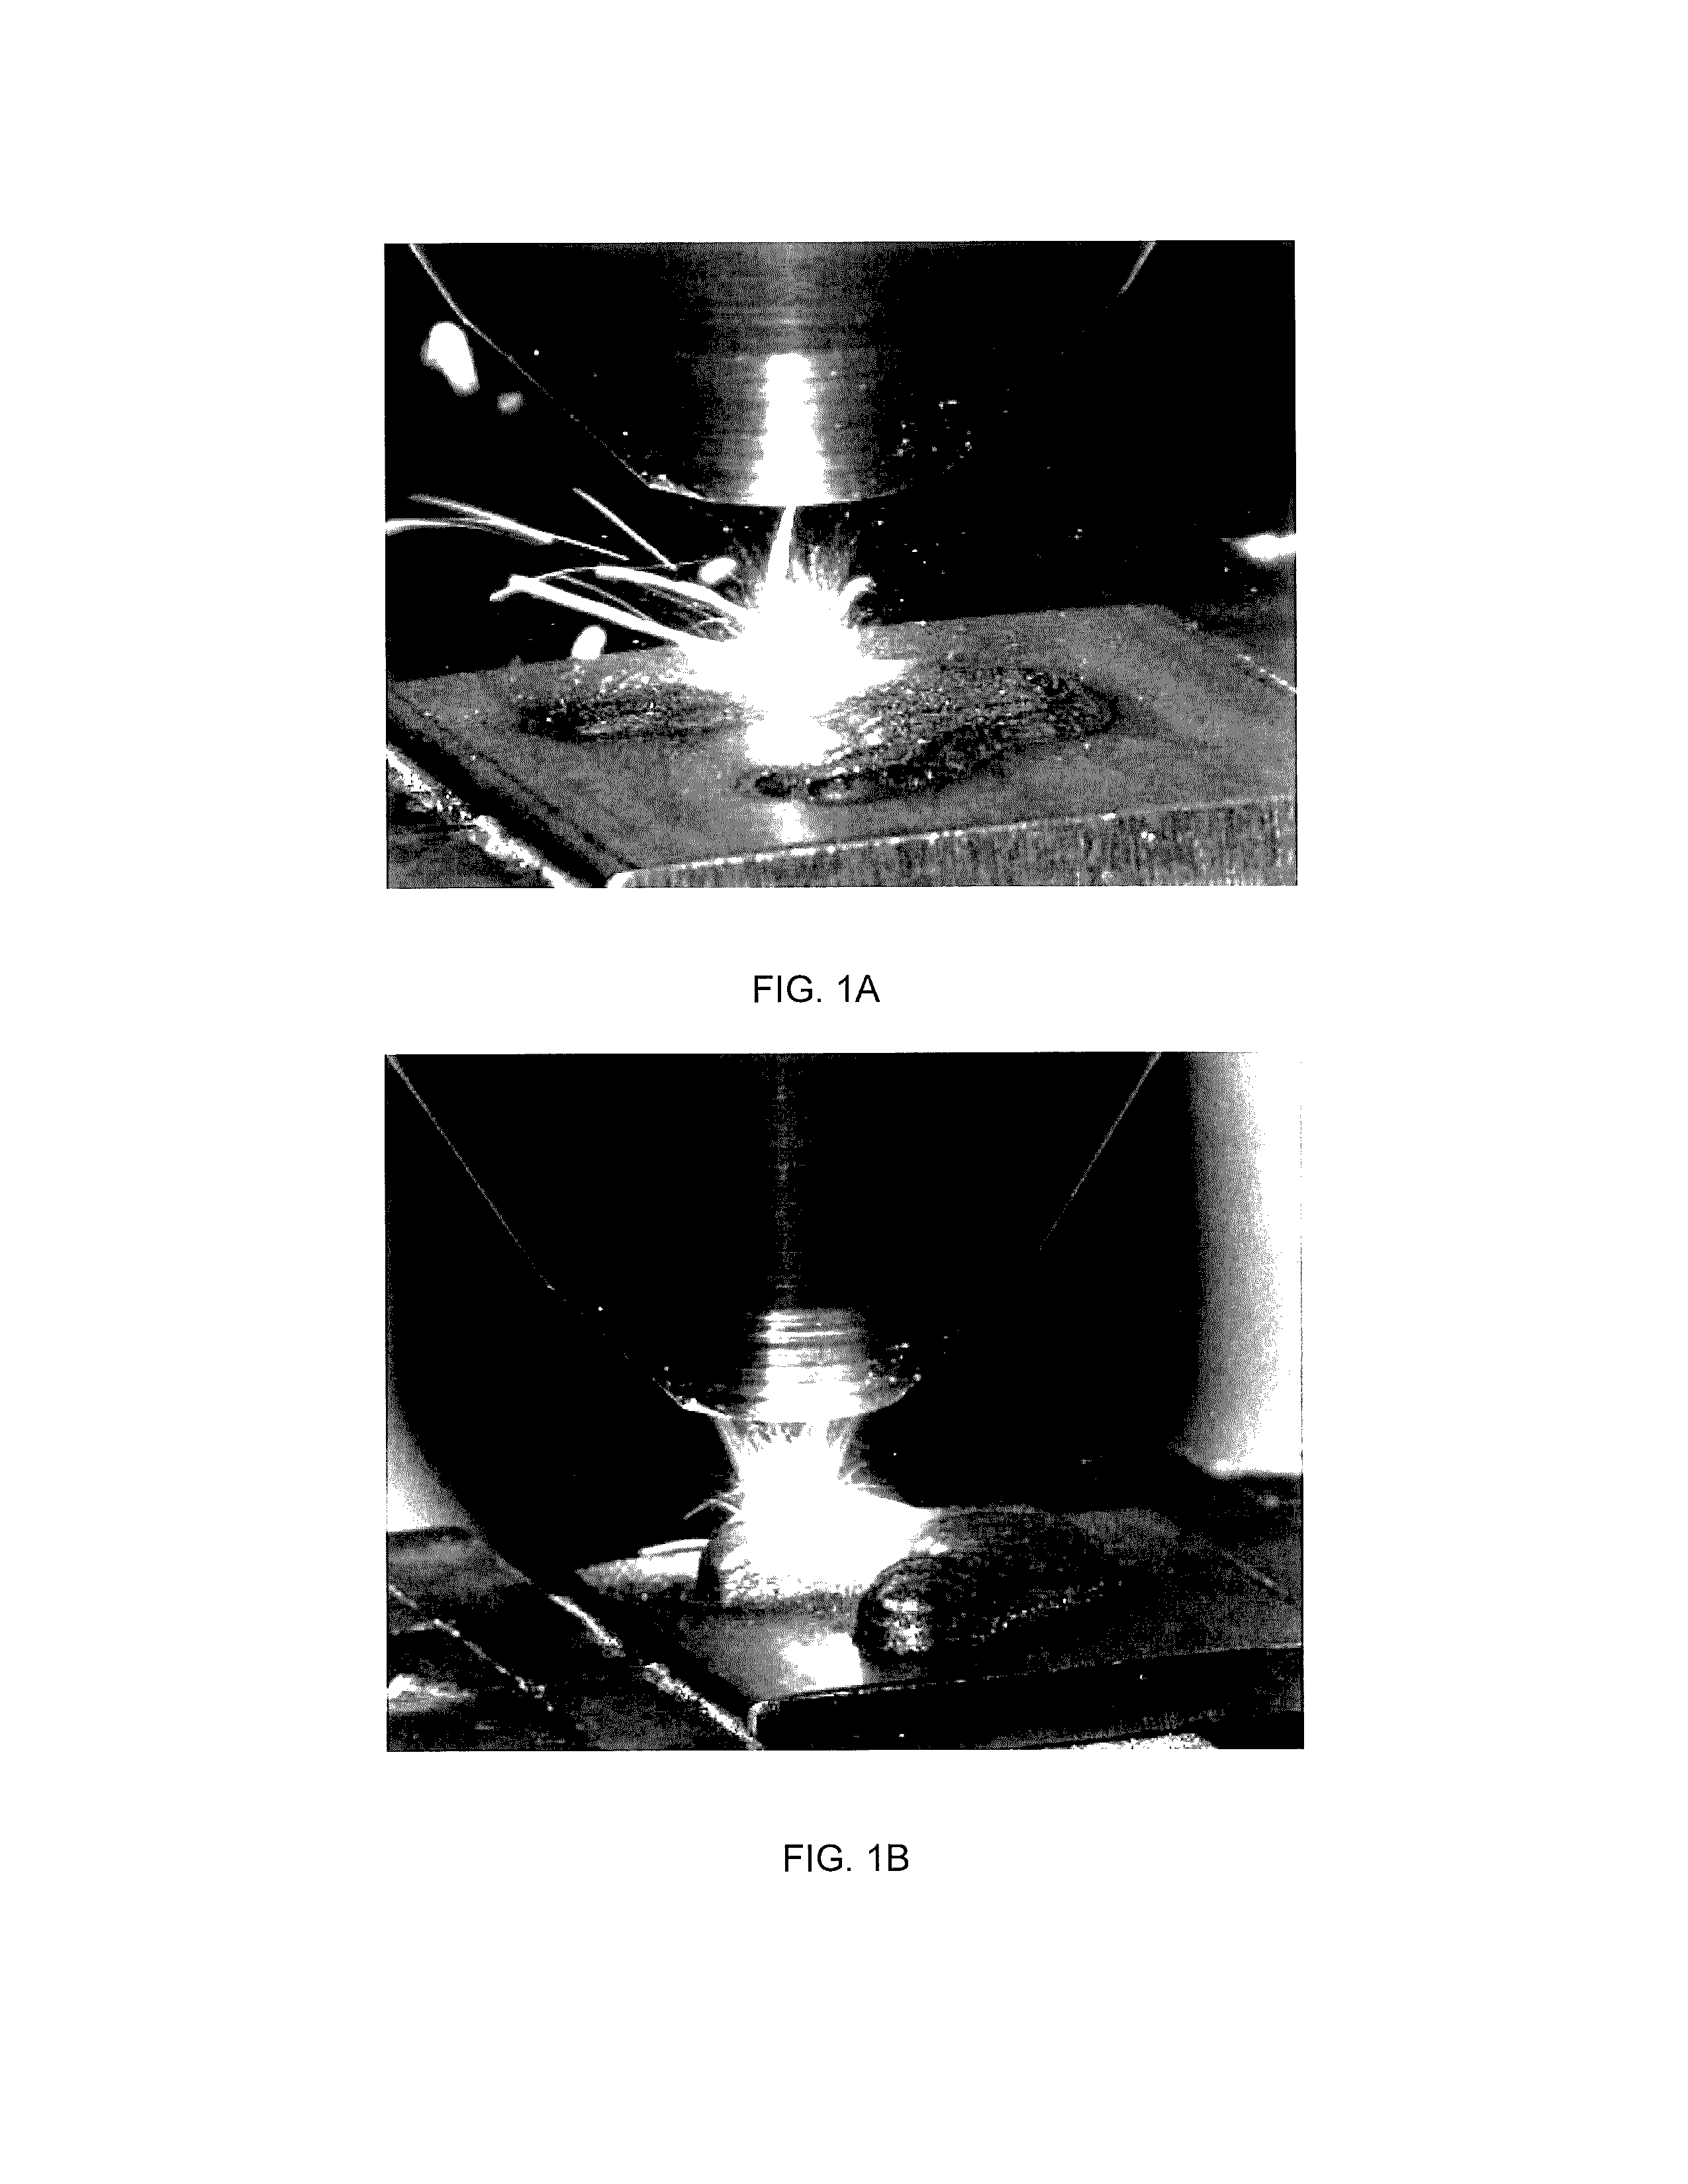 System and method for determining beam power level along an additive deposition path